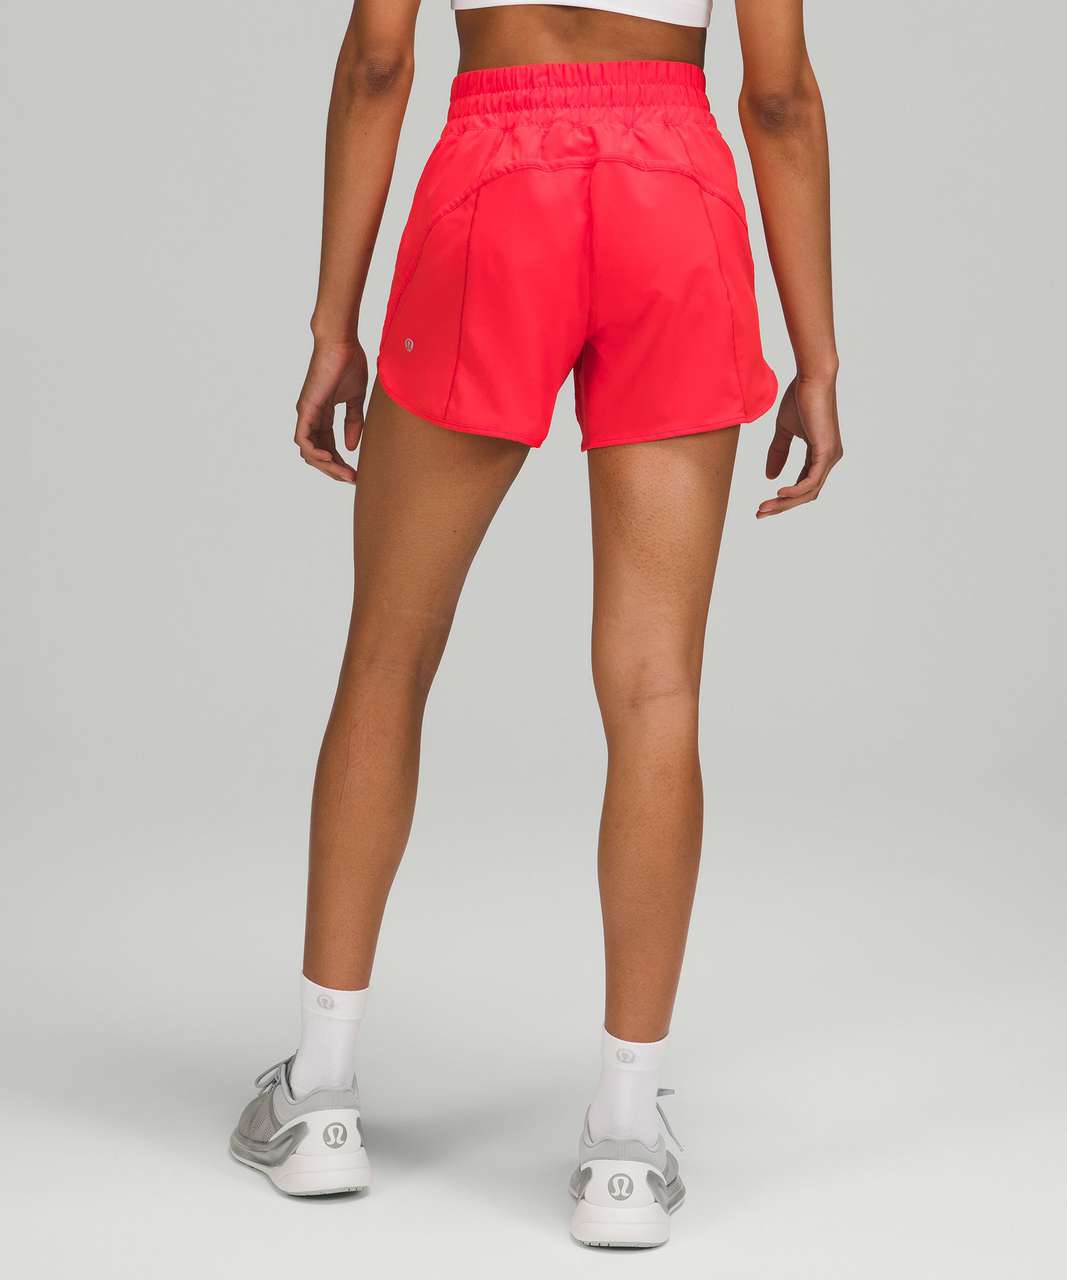 Lululemon Track That Mid-Rise Lined Short 5 - Love Red - lulu